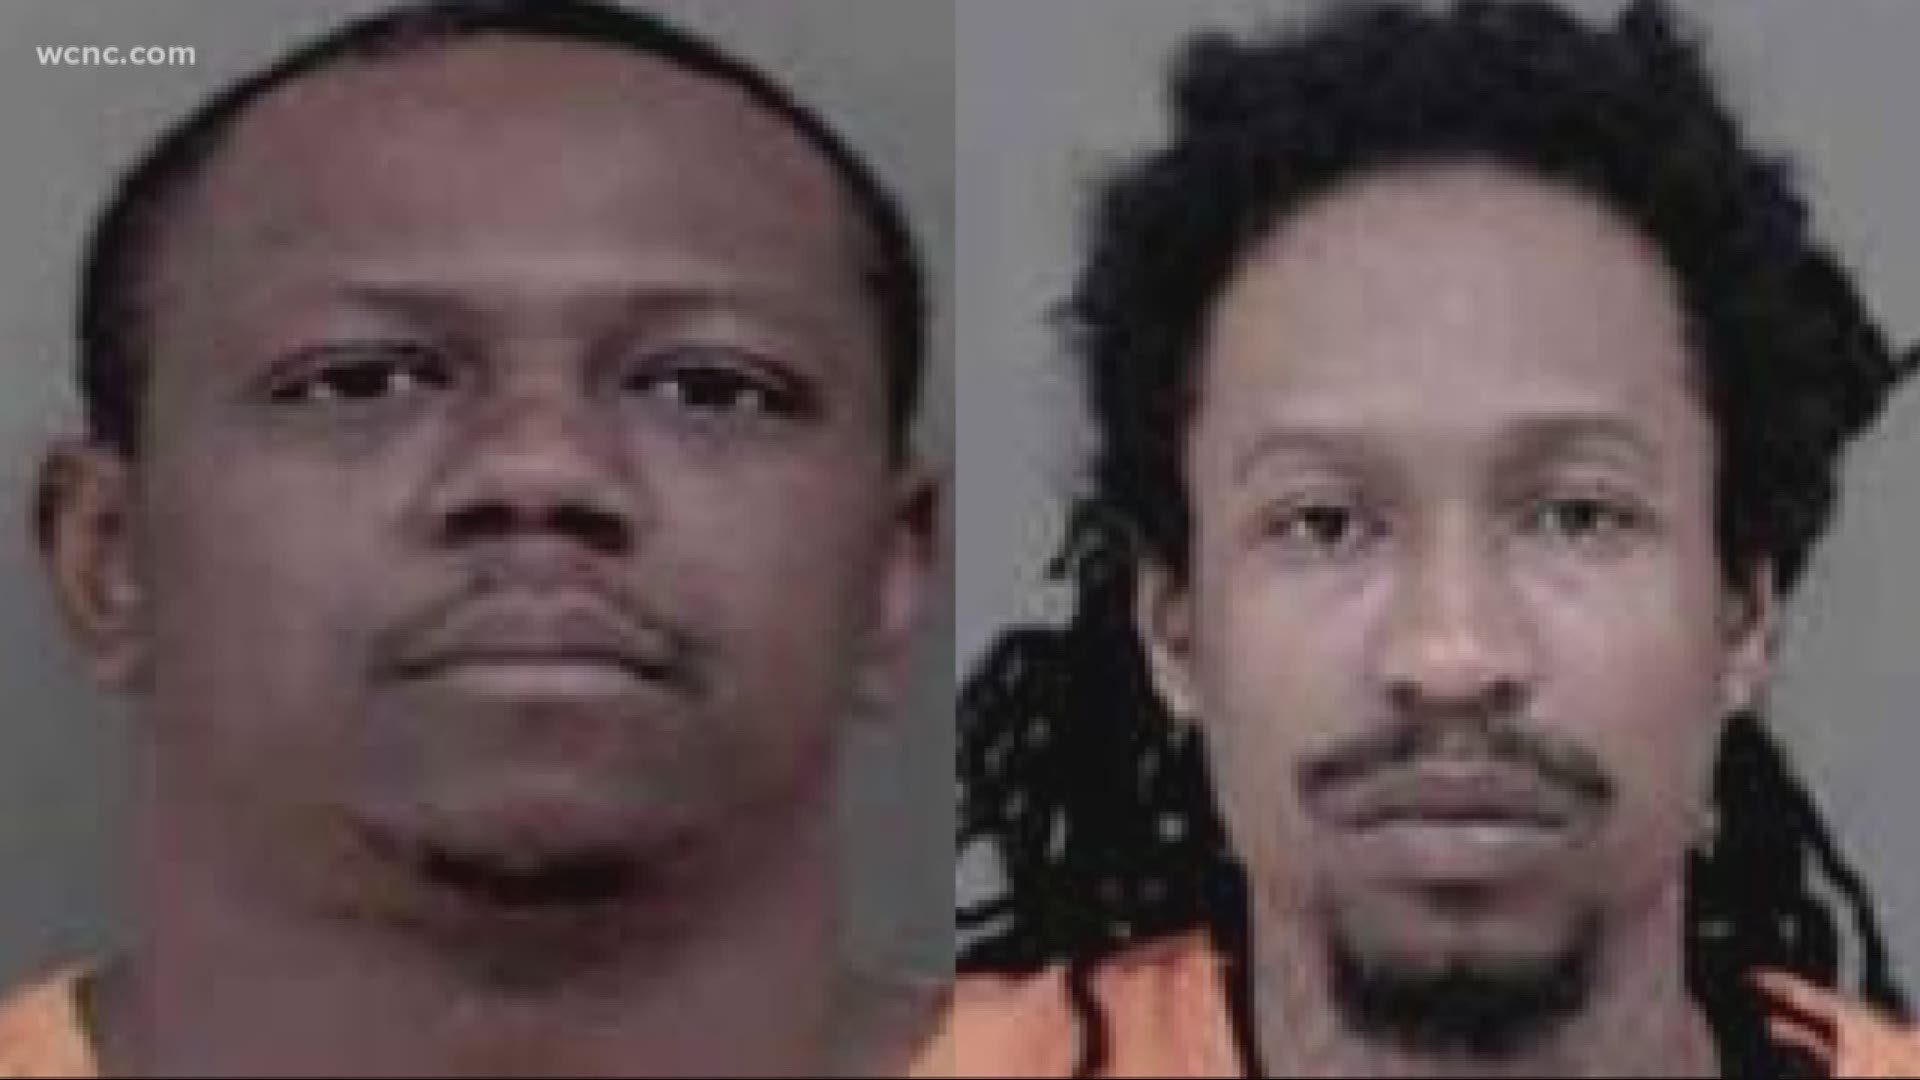 Police arrested two men for their connection to robberies dating back to early 2018. Those crimes often targeted dollar stores all across the Queen City.